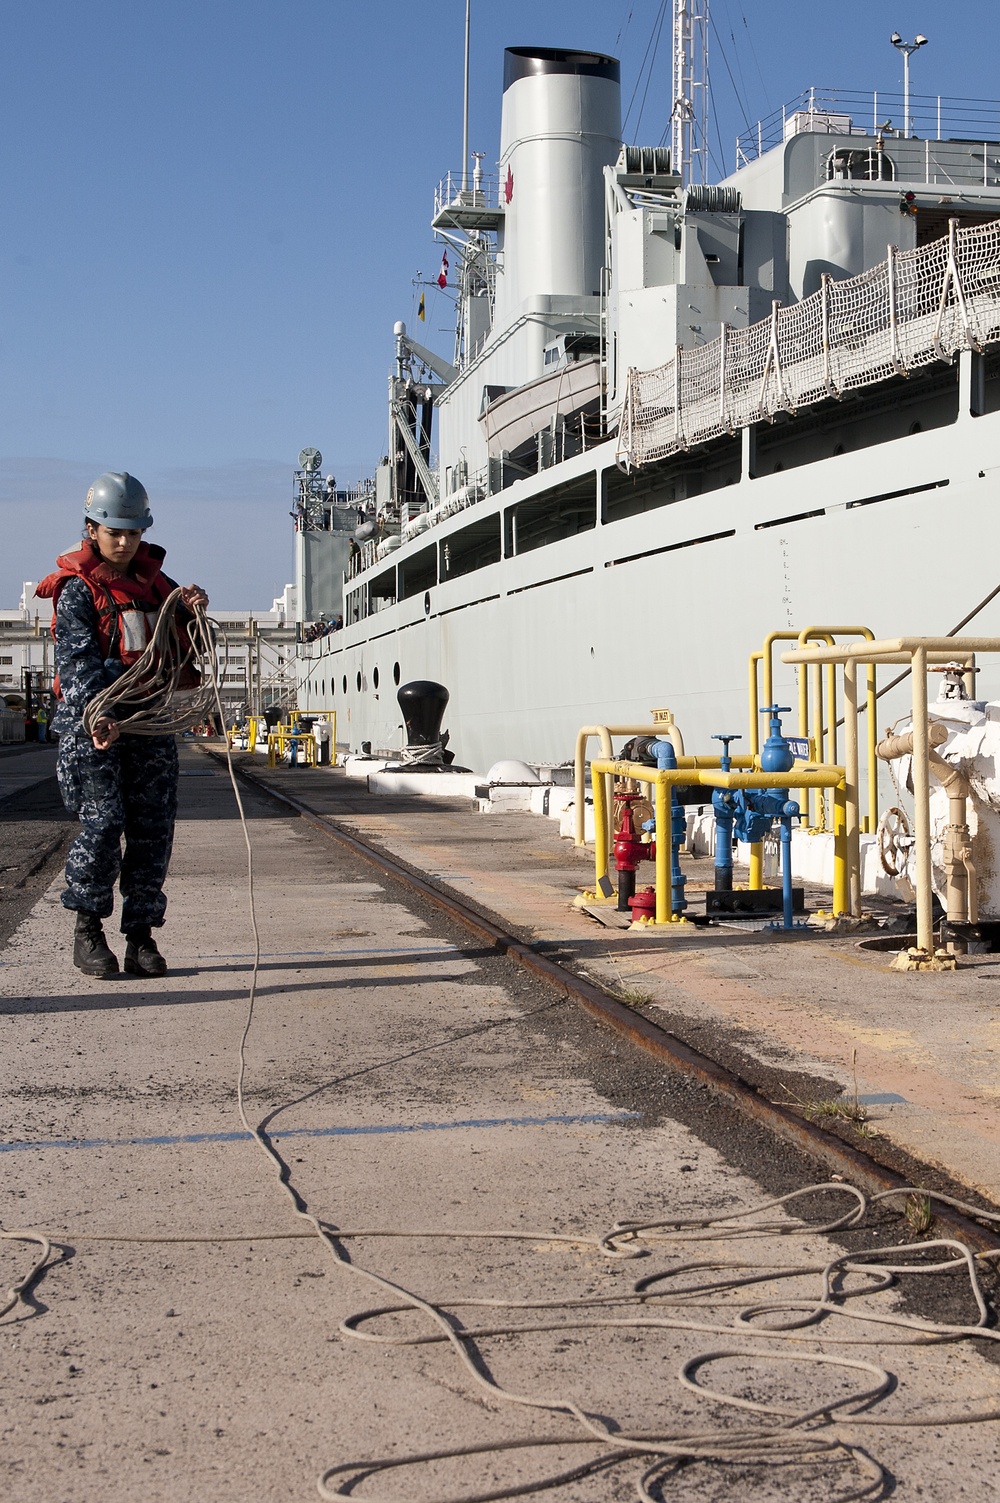 HMCS Protecteur, crew arrive safely at Joint Base Pearl Harbor-Hickam